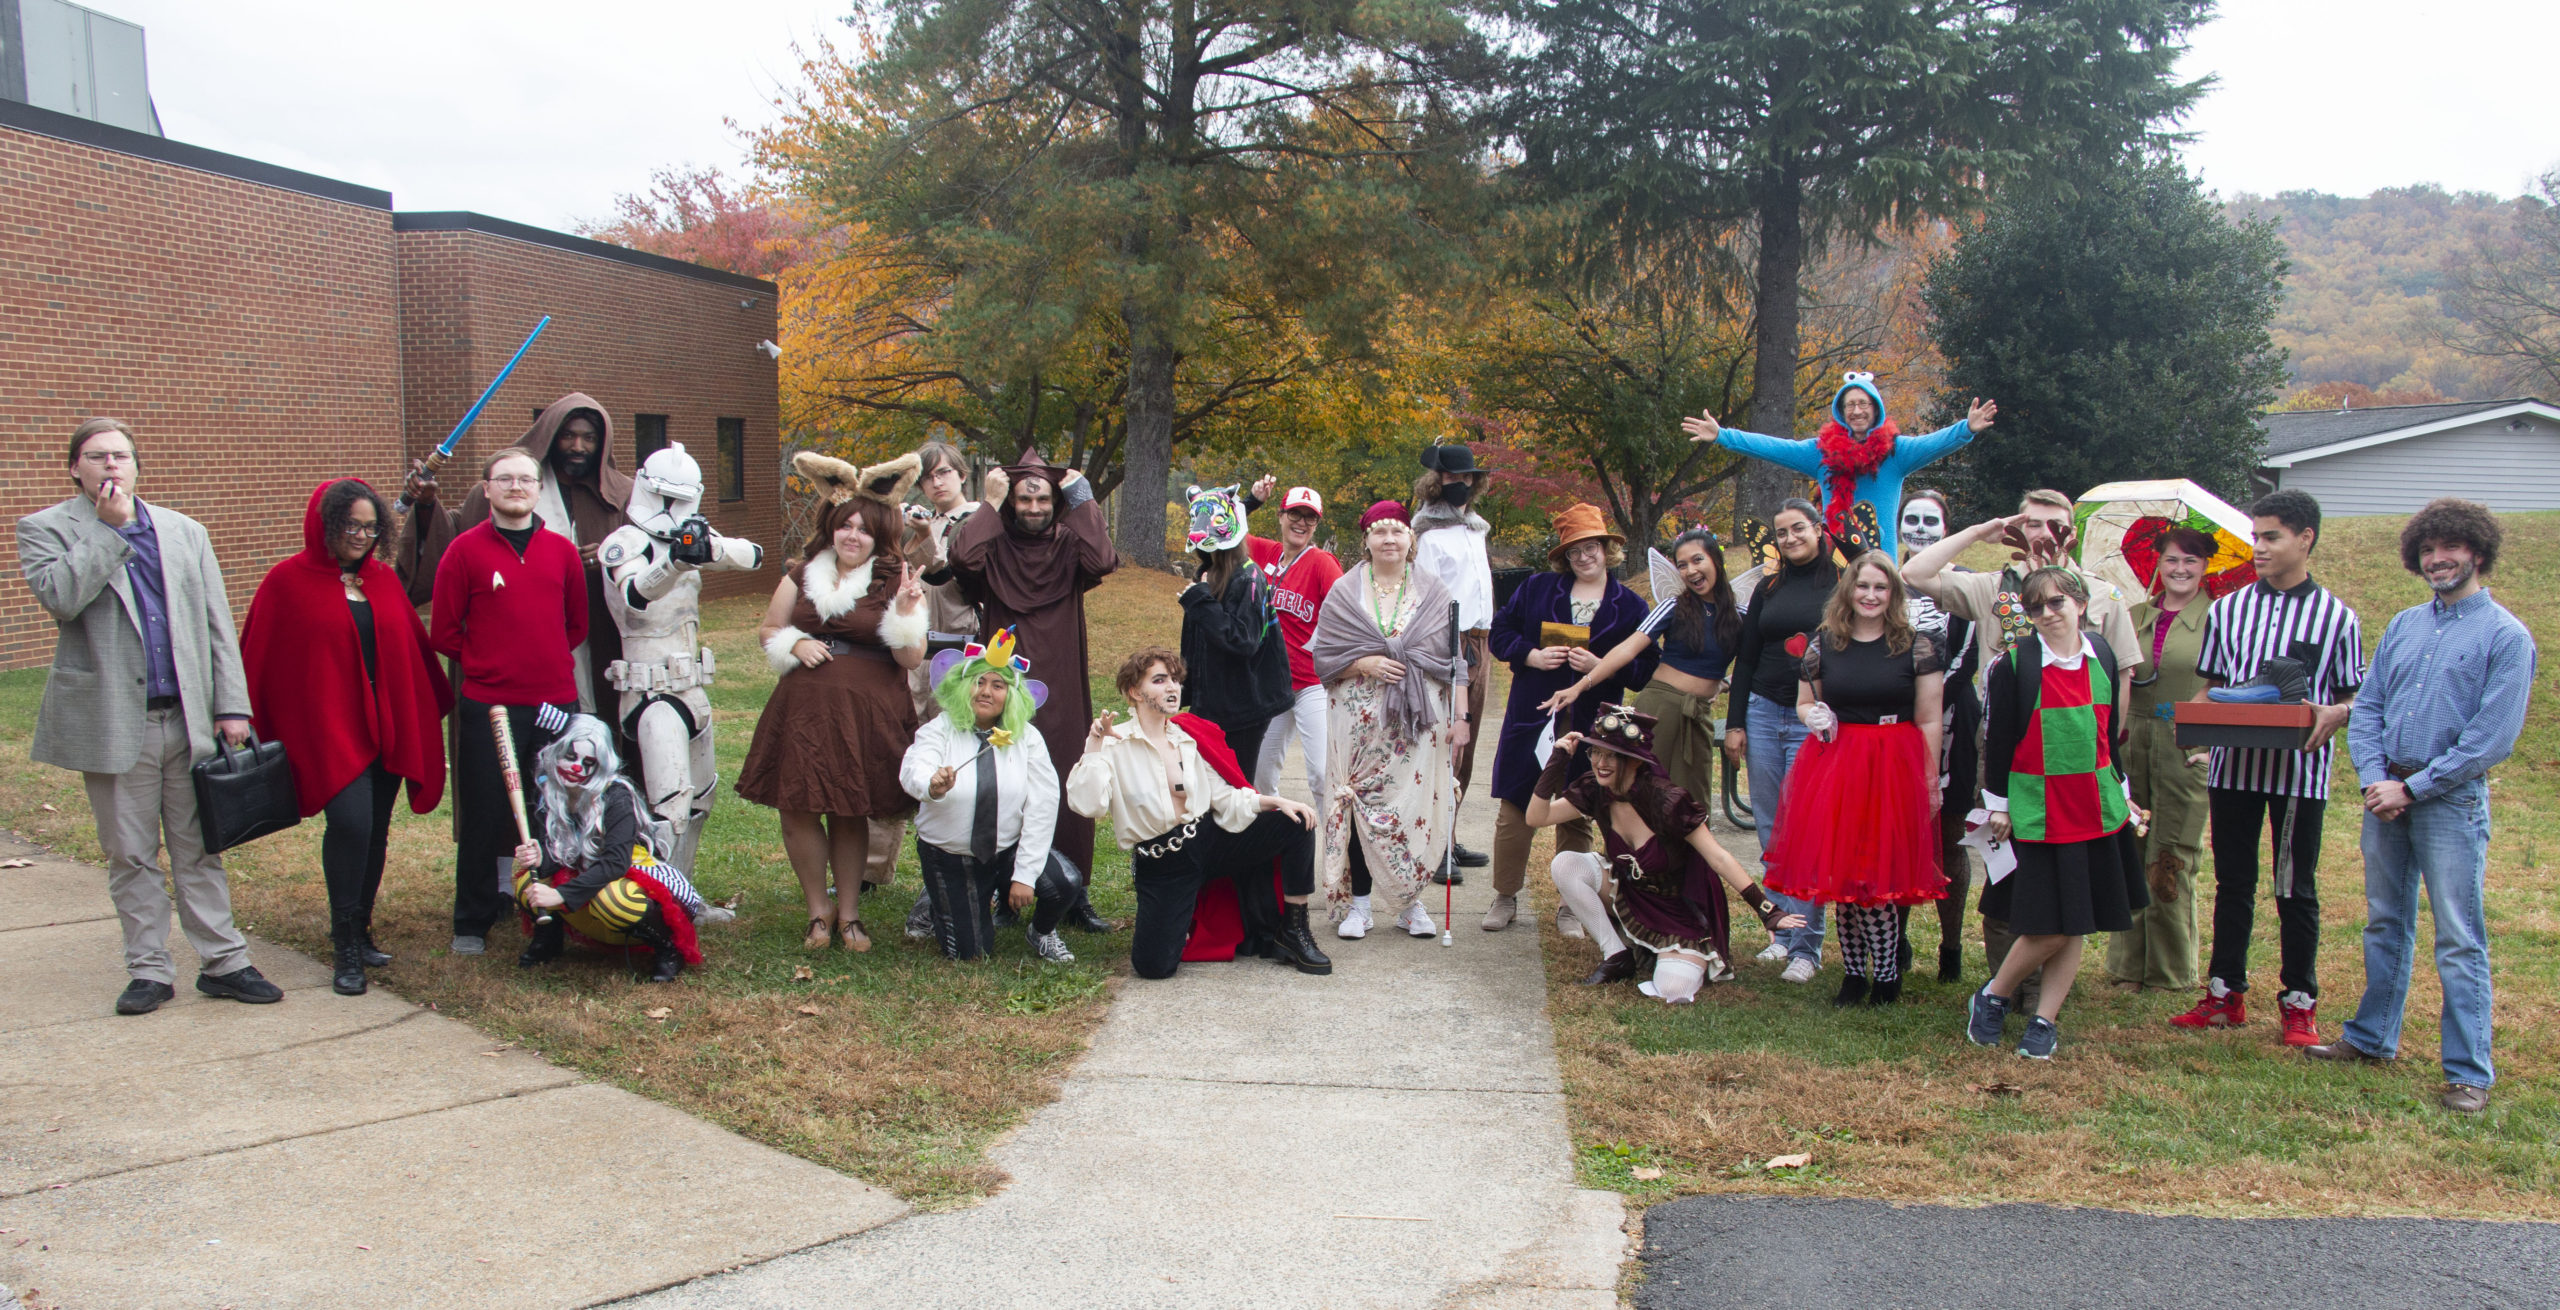 All of the Halloween Costume Competition contestants posing for a group photo.